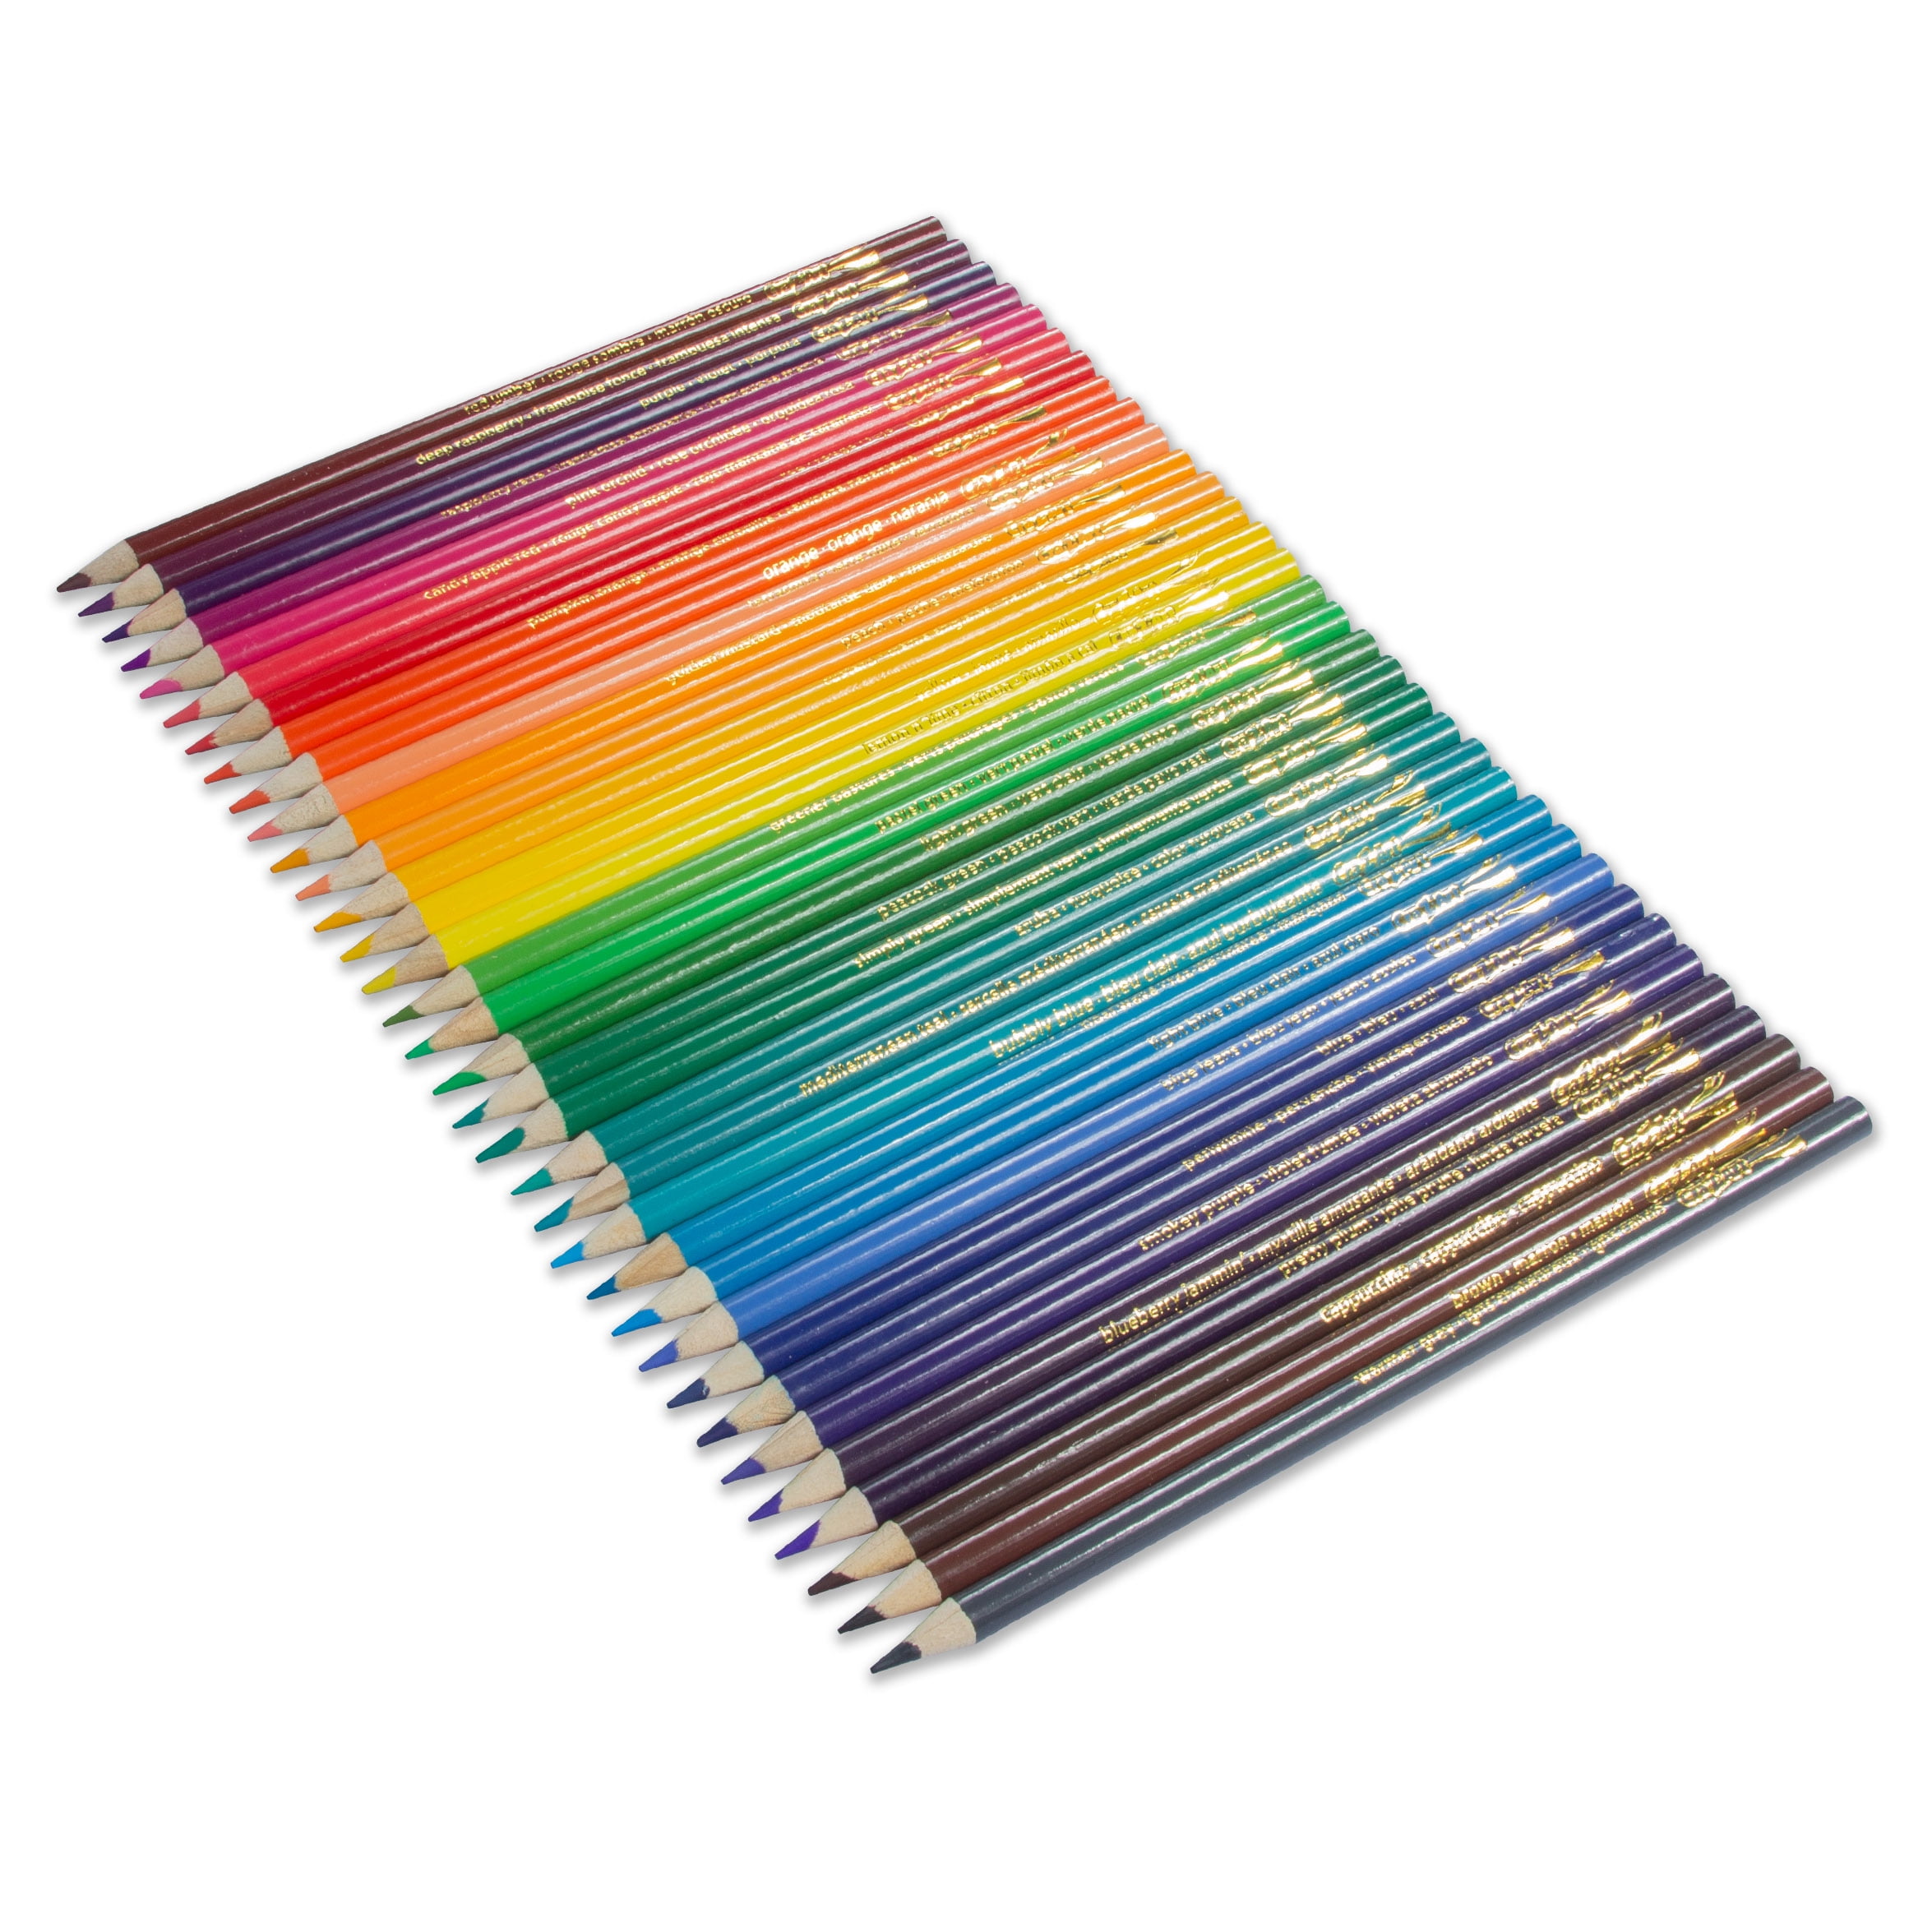 100 Count Colored Pencils – Lasting Impressions for Paper